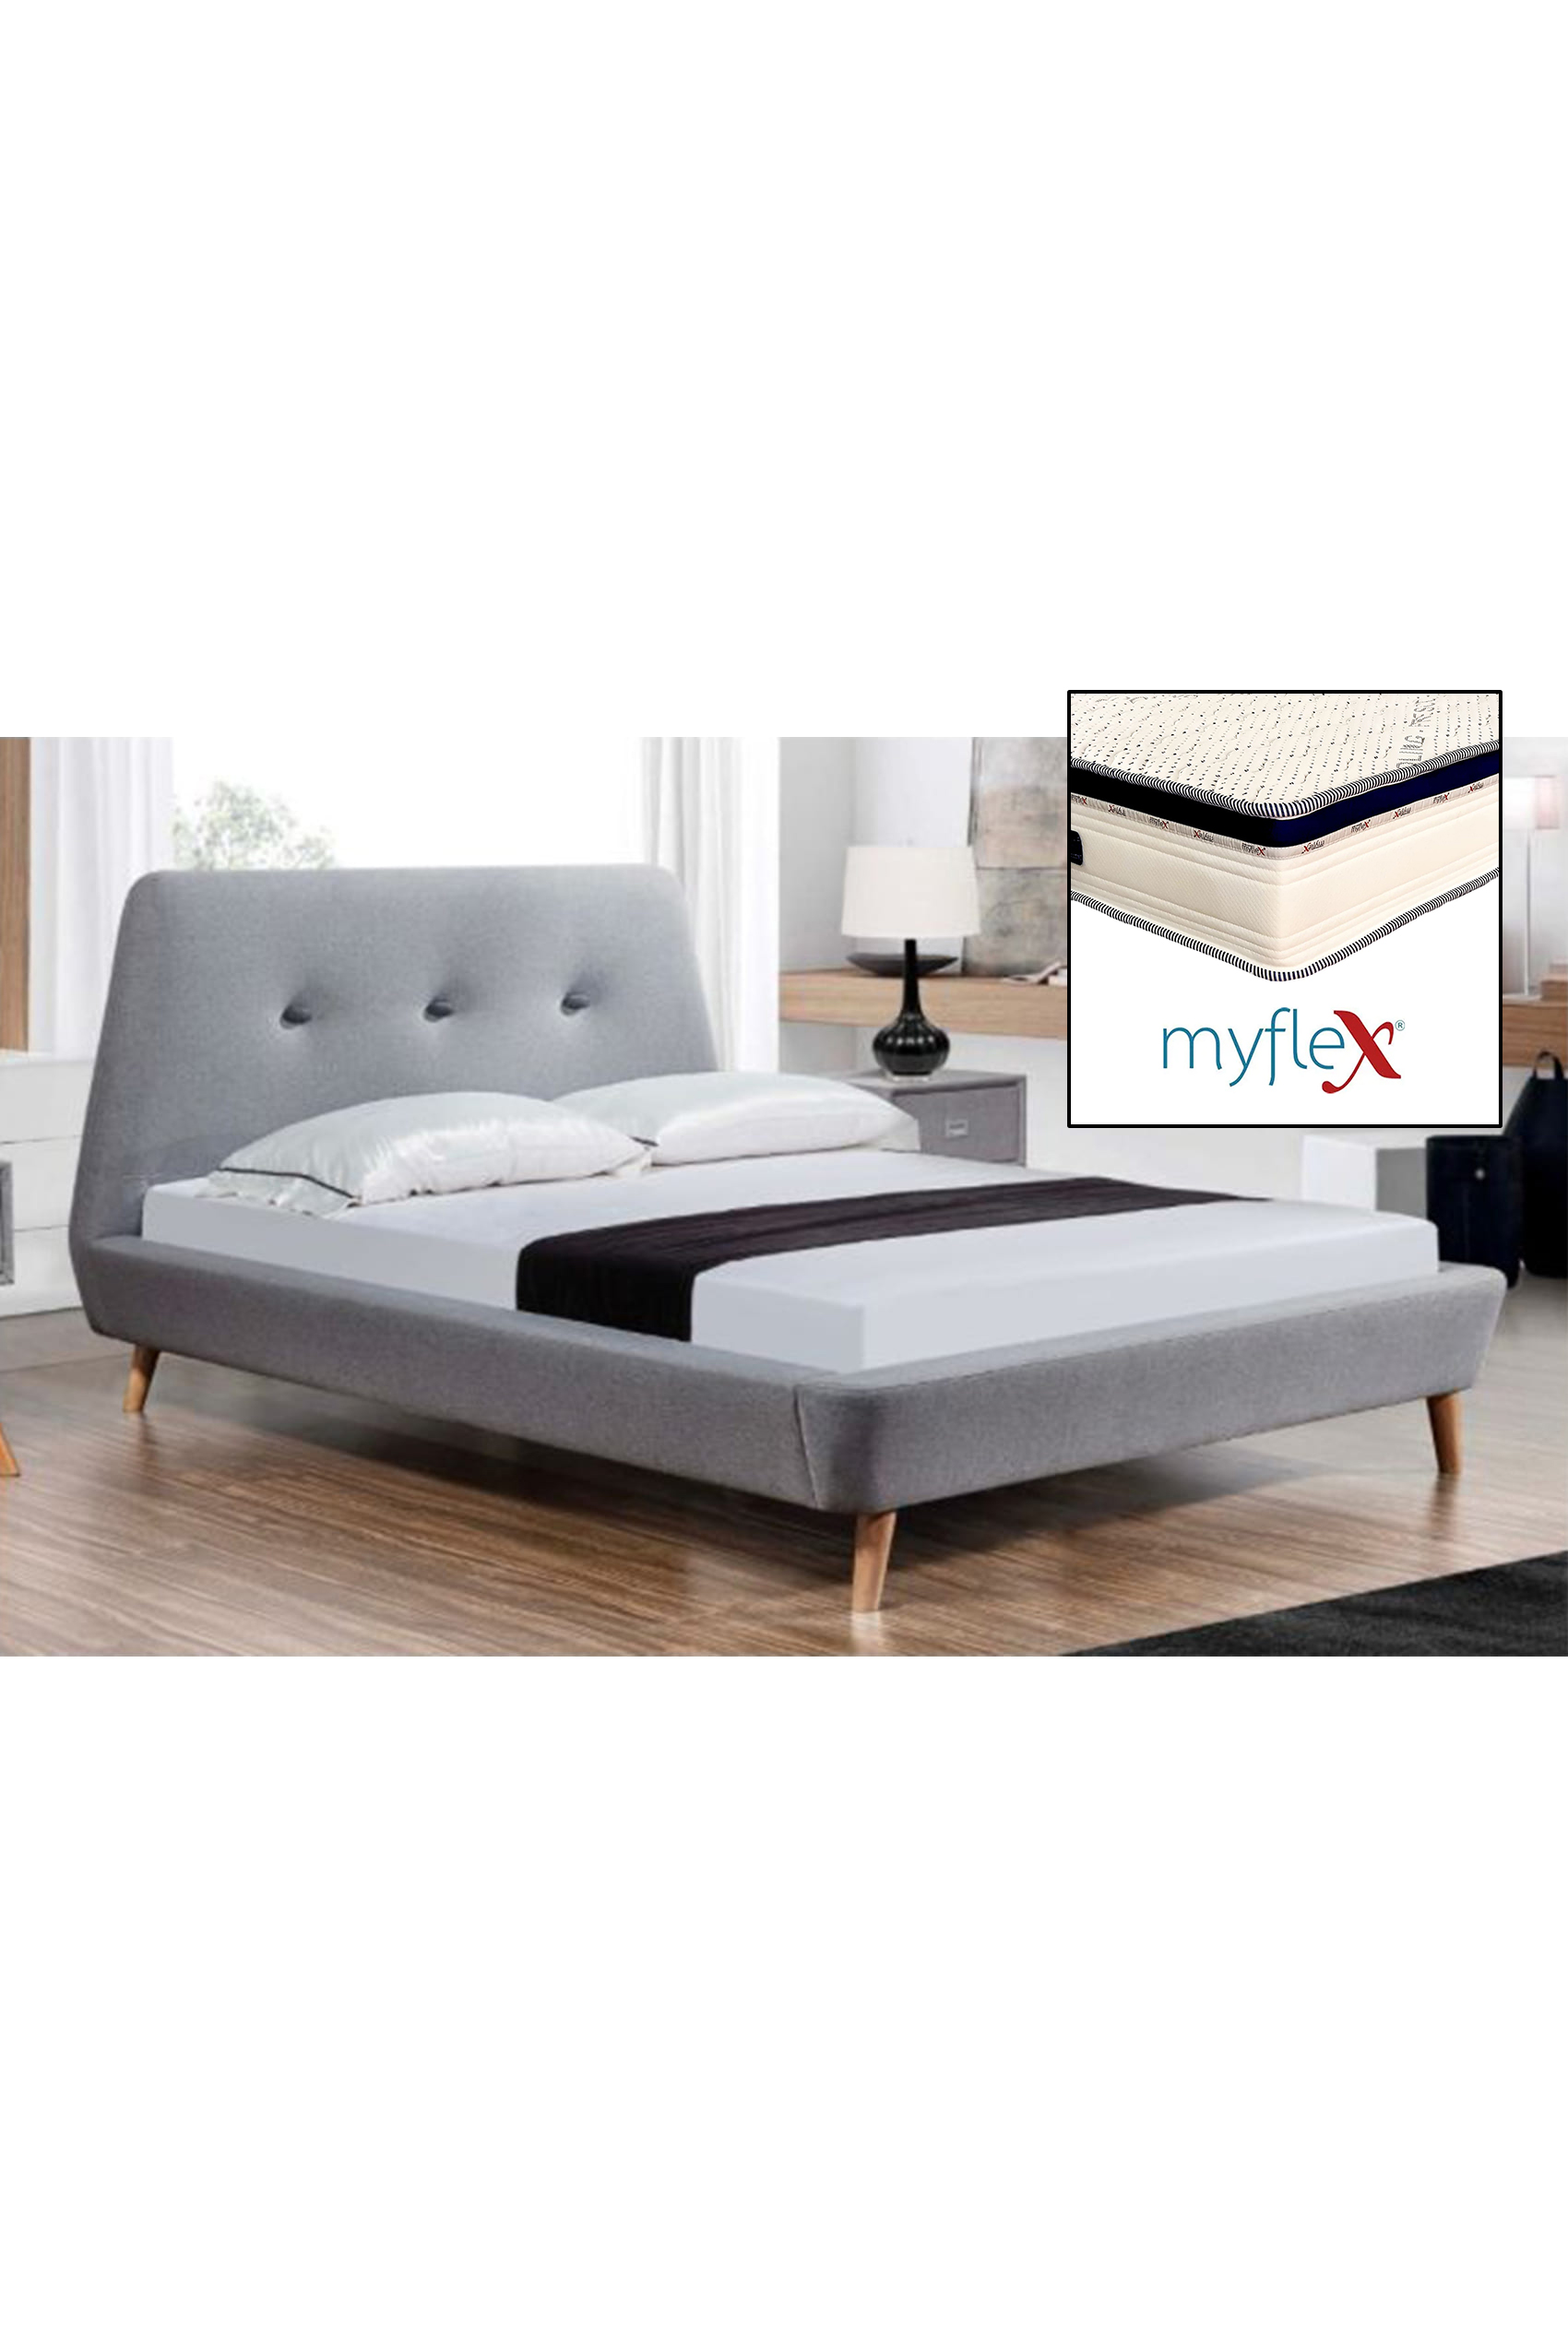 Lozzolo Queen Size Panel Bed Frame + Myflex Mattress